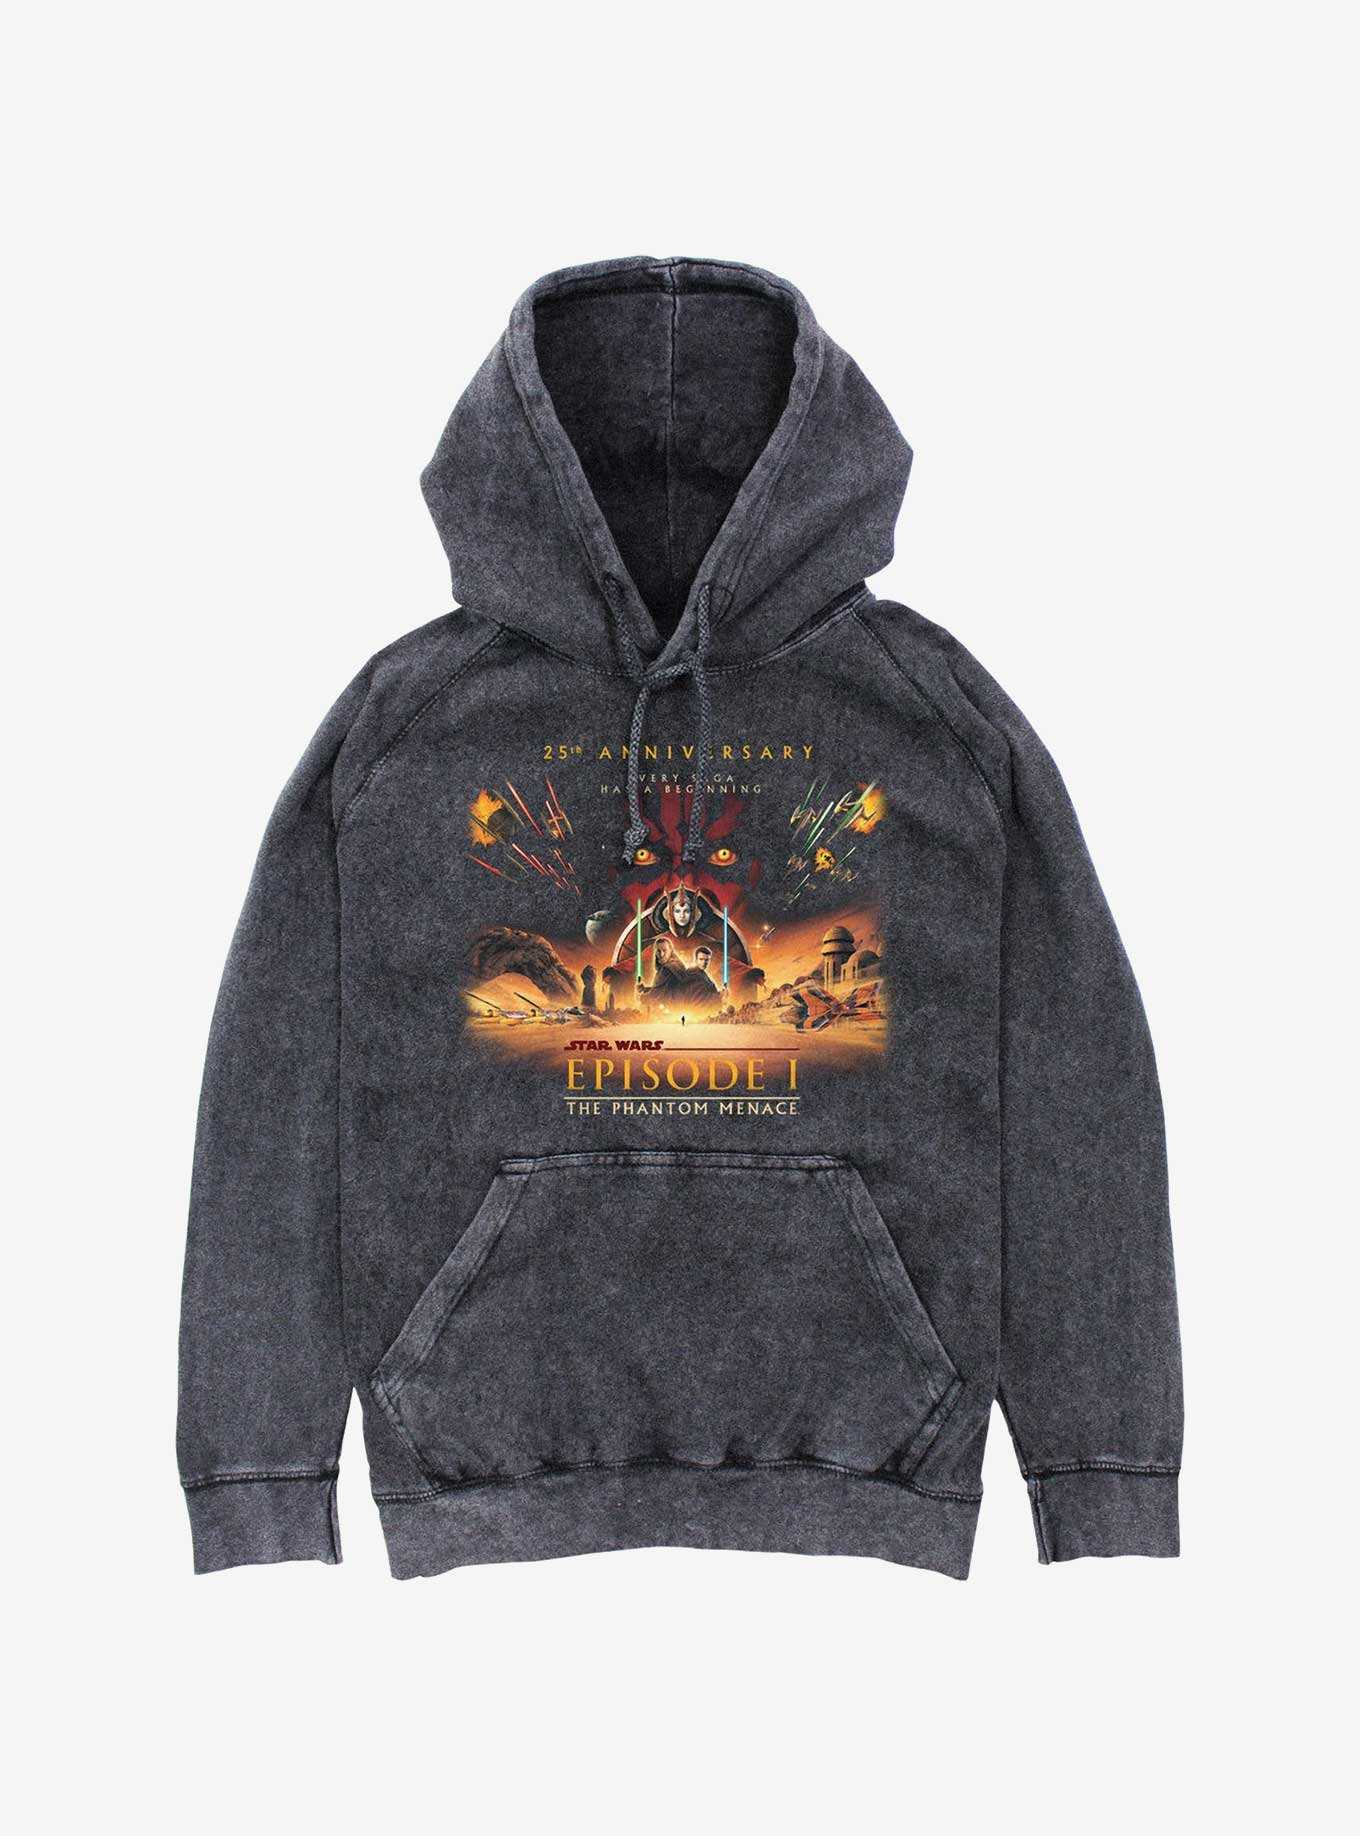 Star Wars Episode I: The Phantom Menace Wide 25th Anniversary Poster Mineral Wash Hoodie, , hi-res